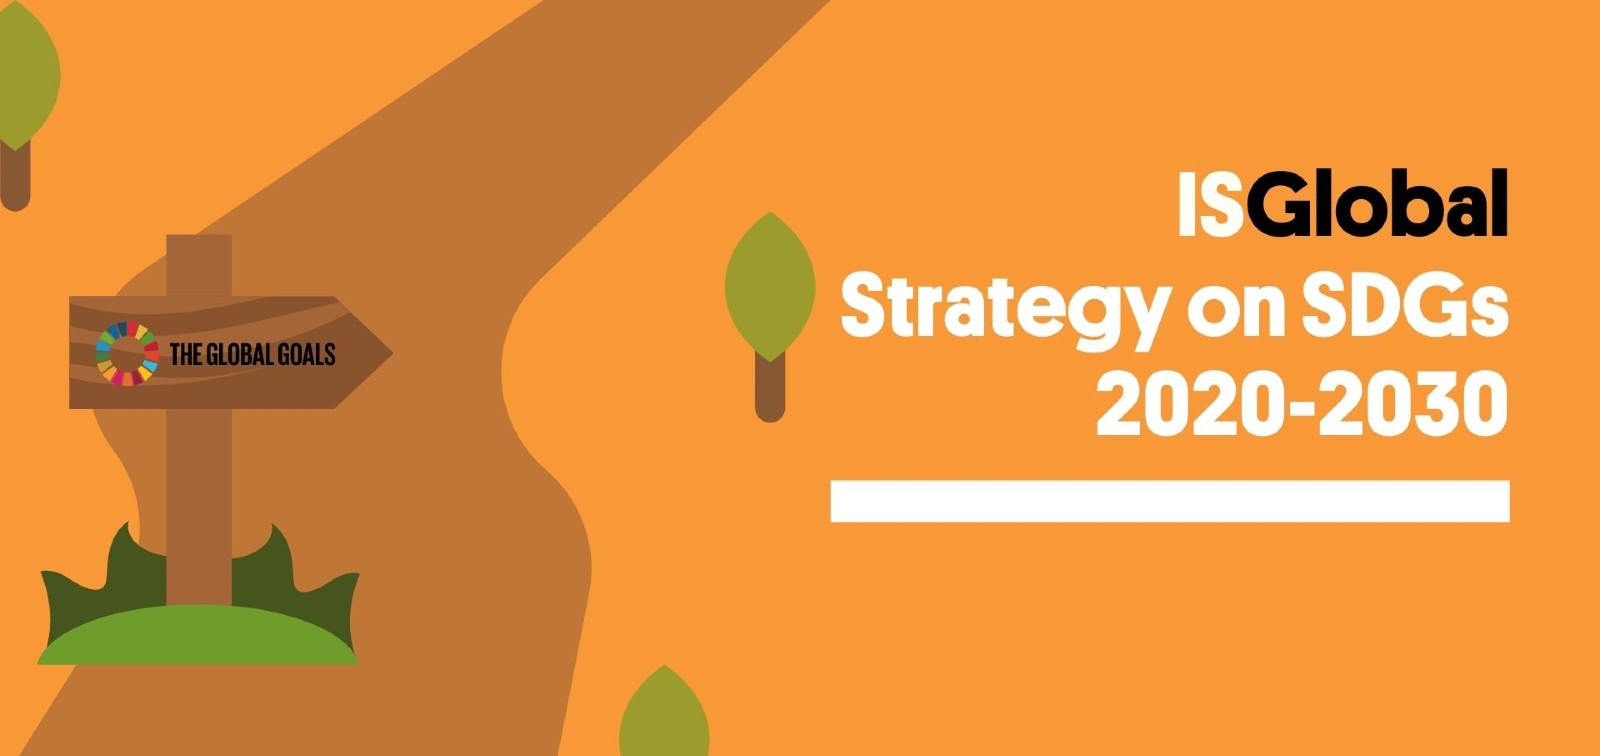 ISGlobal Strategy on SDGs 2020-2030